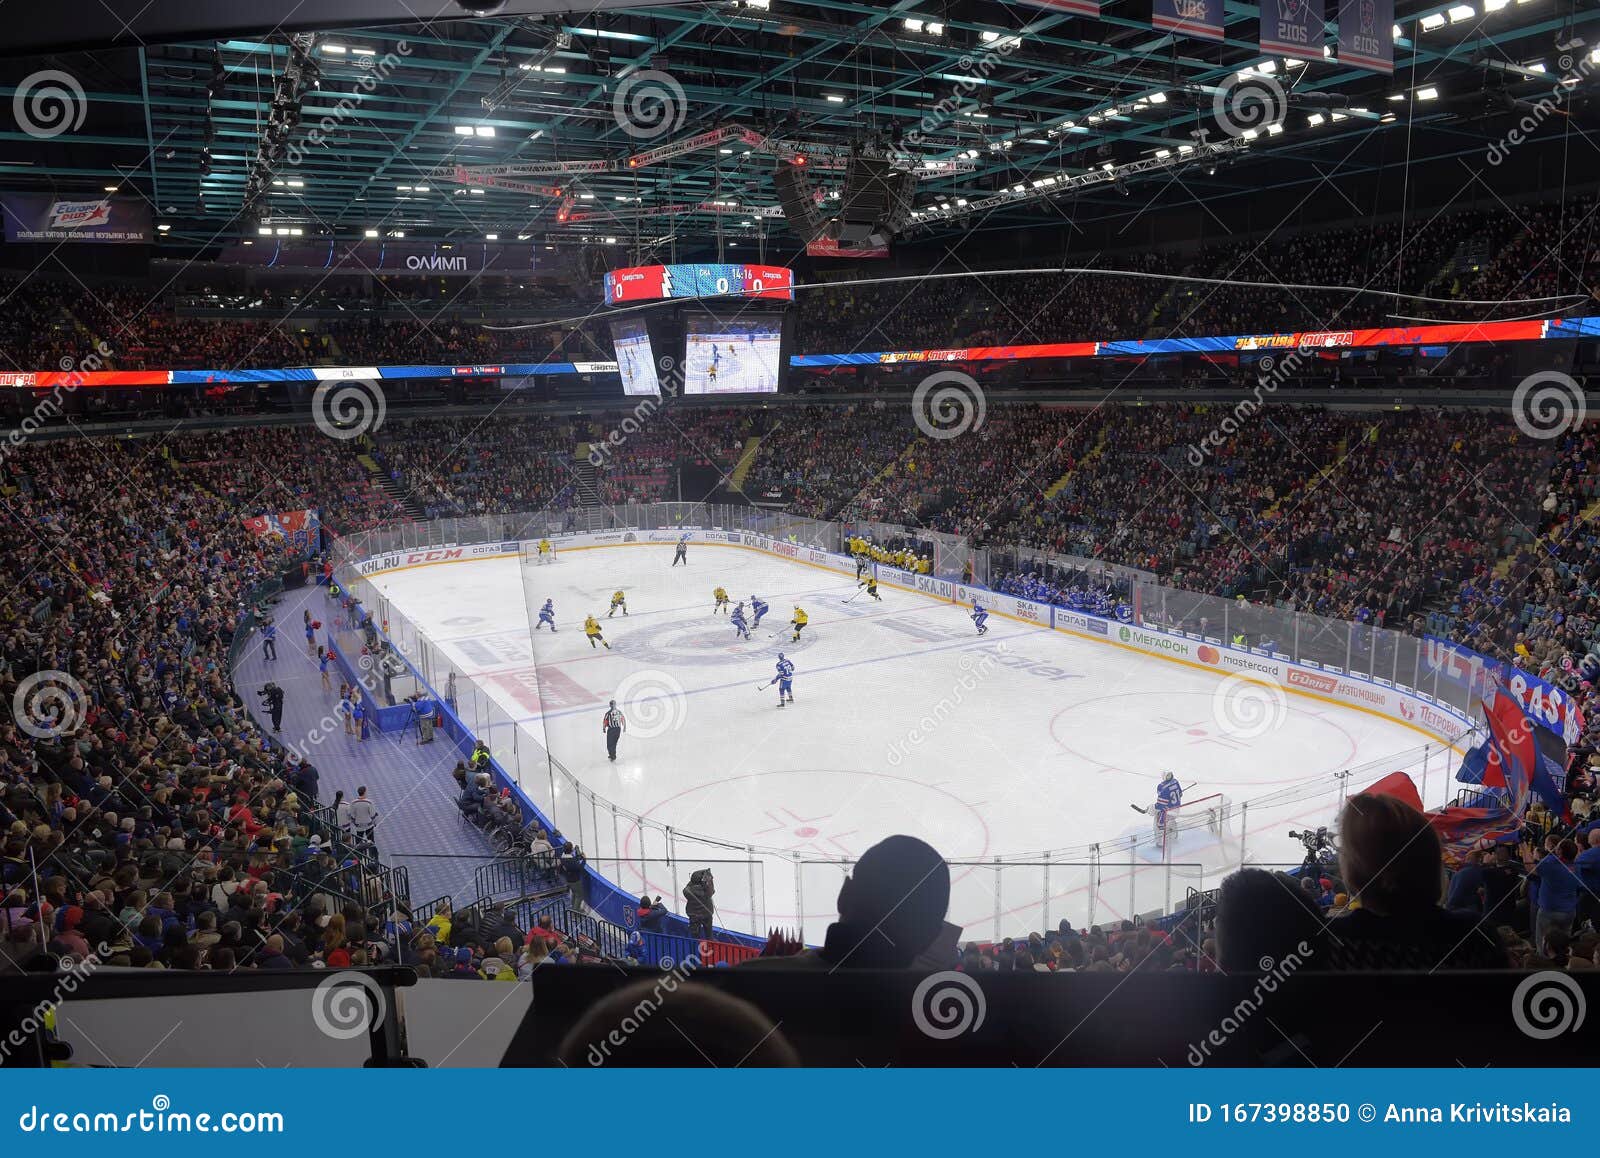 KHL Hockey Match, Spectators in the Stands and the Playing Field Editorial Image